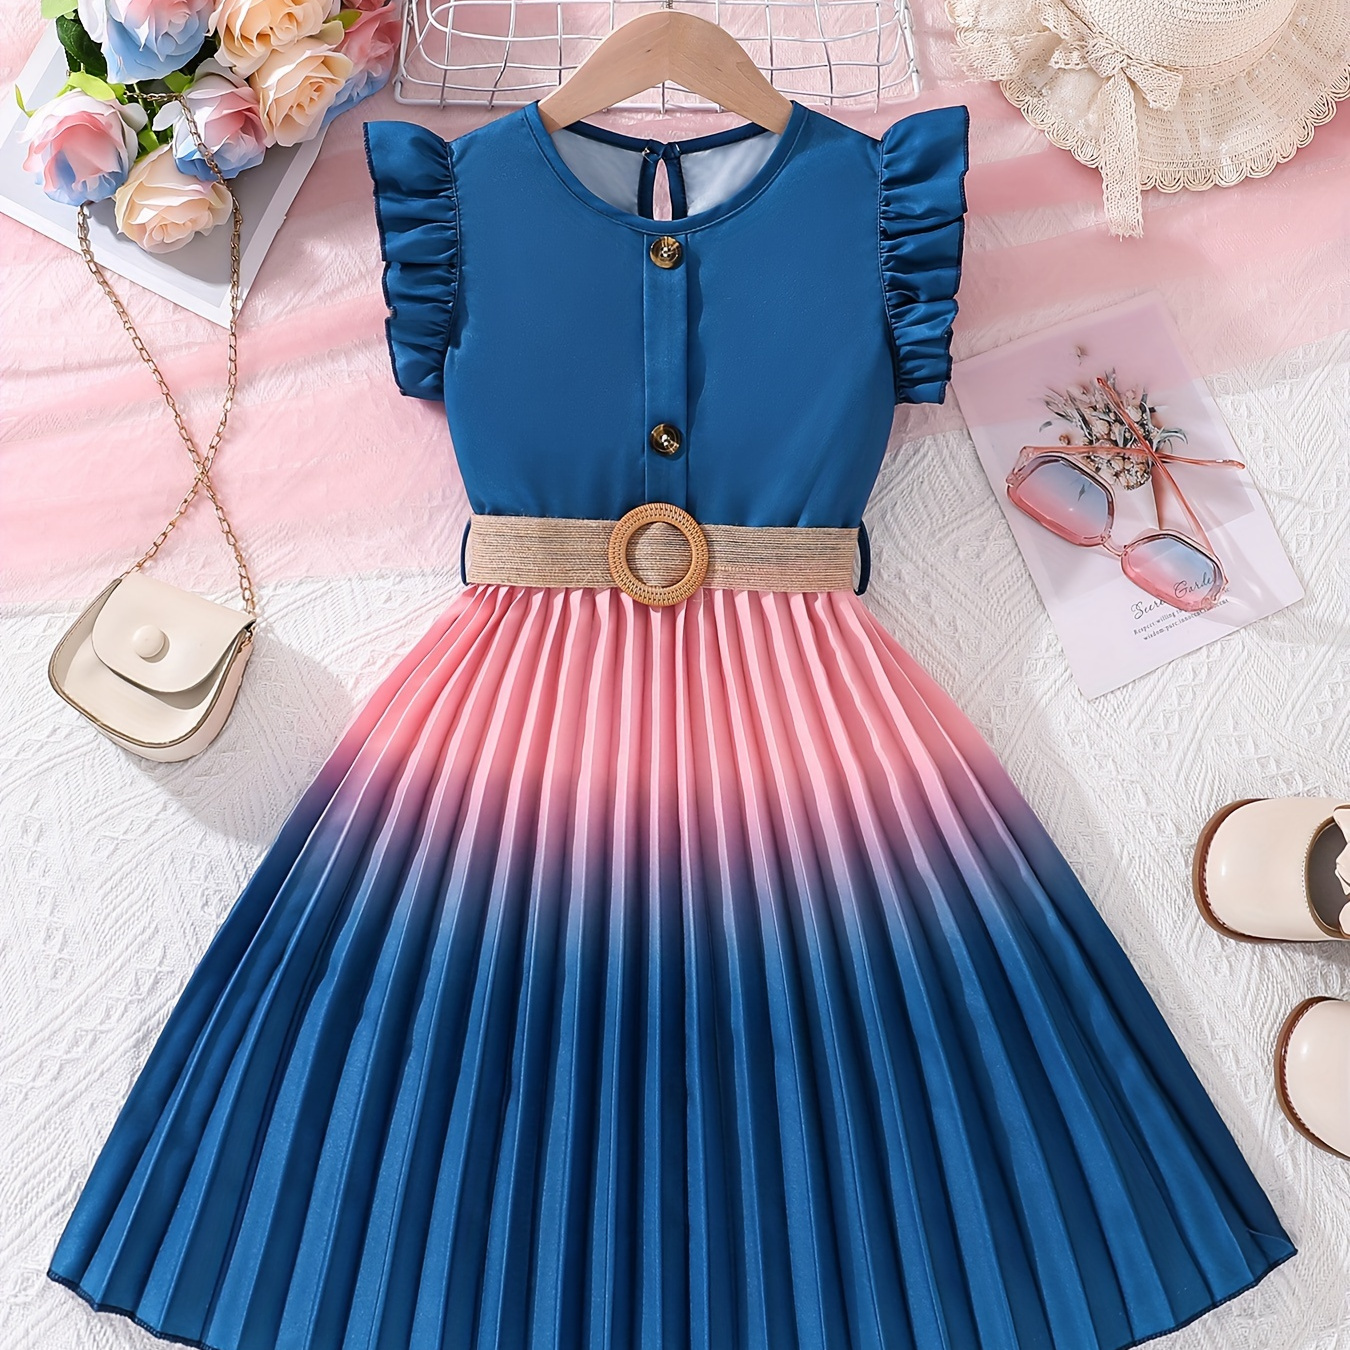 

Elegant Button Decor Gradient Color Pleated Dress Girls Party Casual Dresses Summer Gift